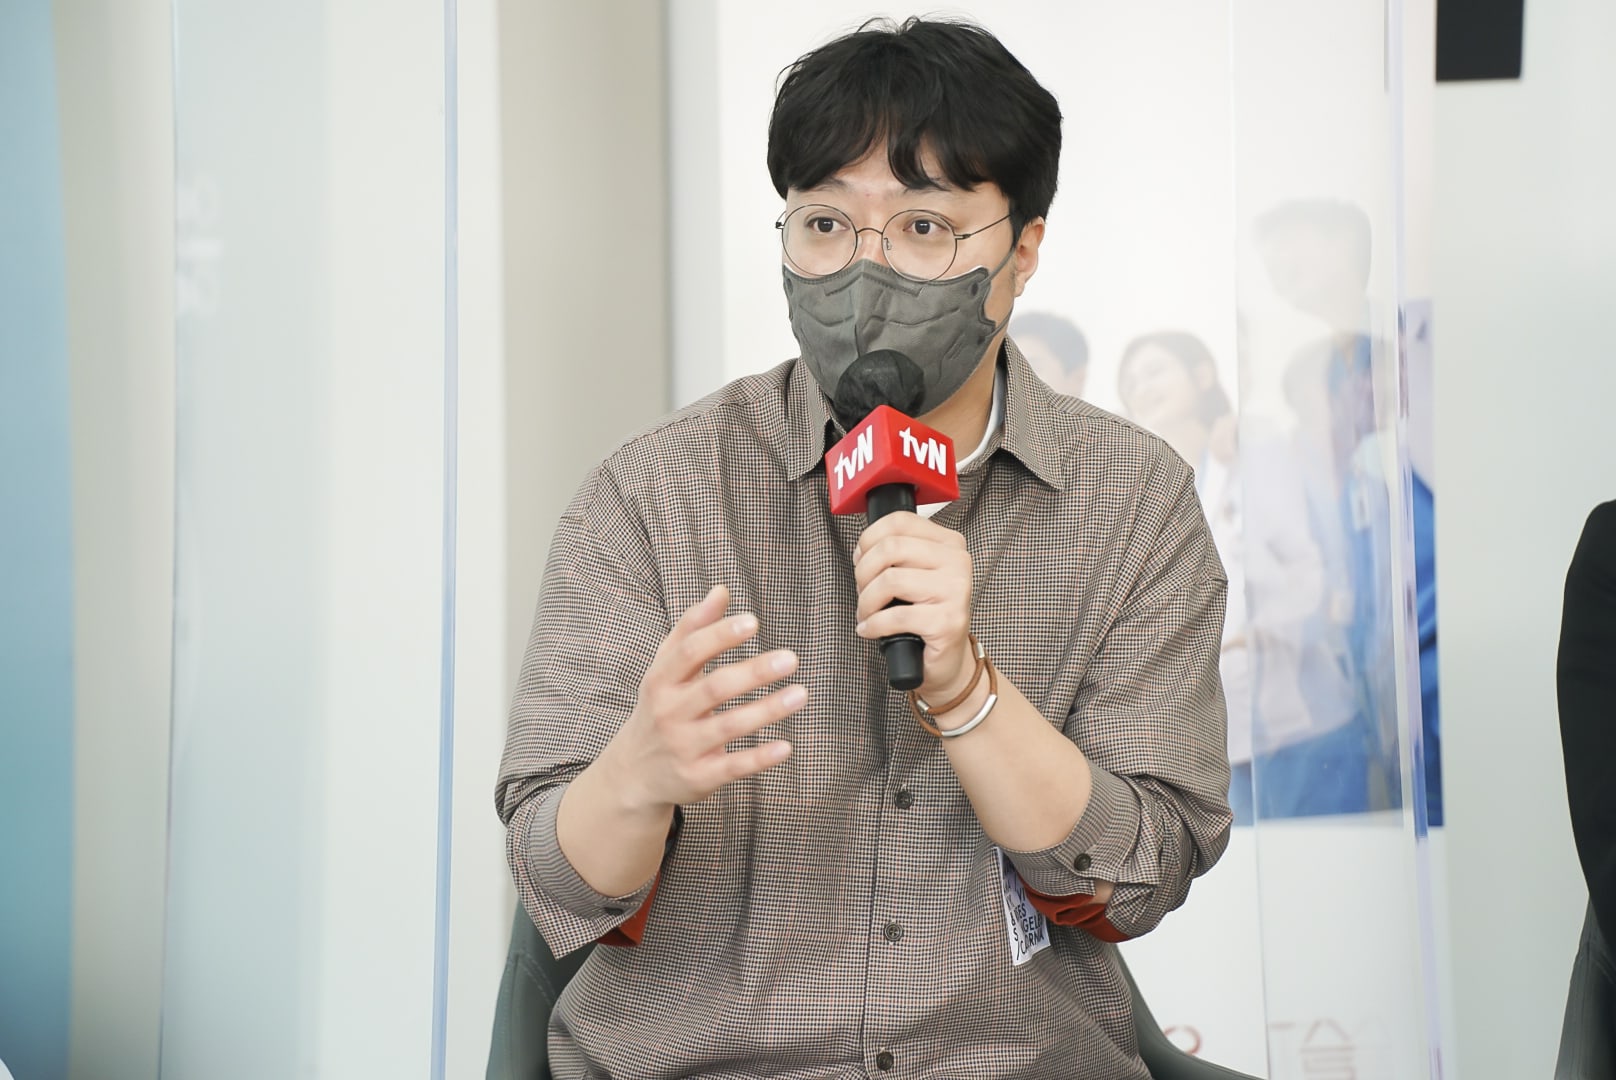 Director Shin Won-ho for 'Hospital Playlist' wearing face mask and holding microphone